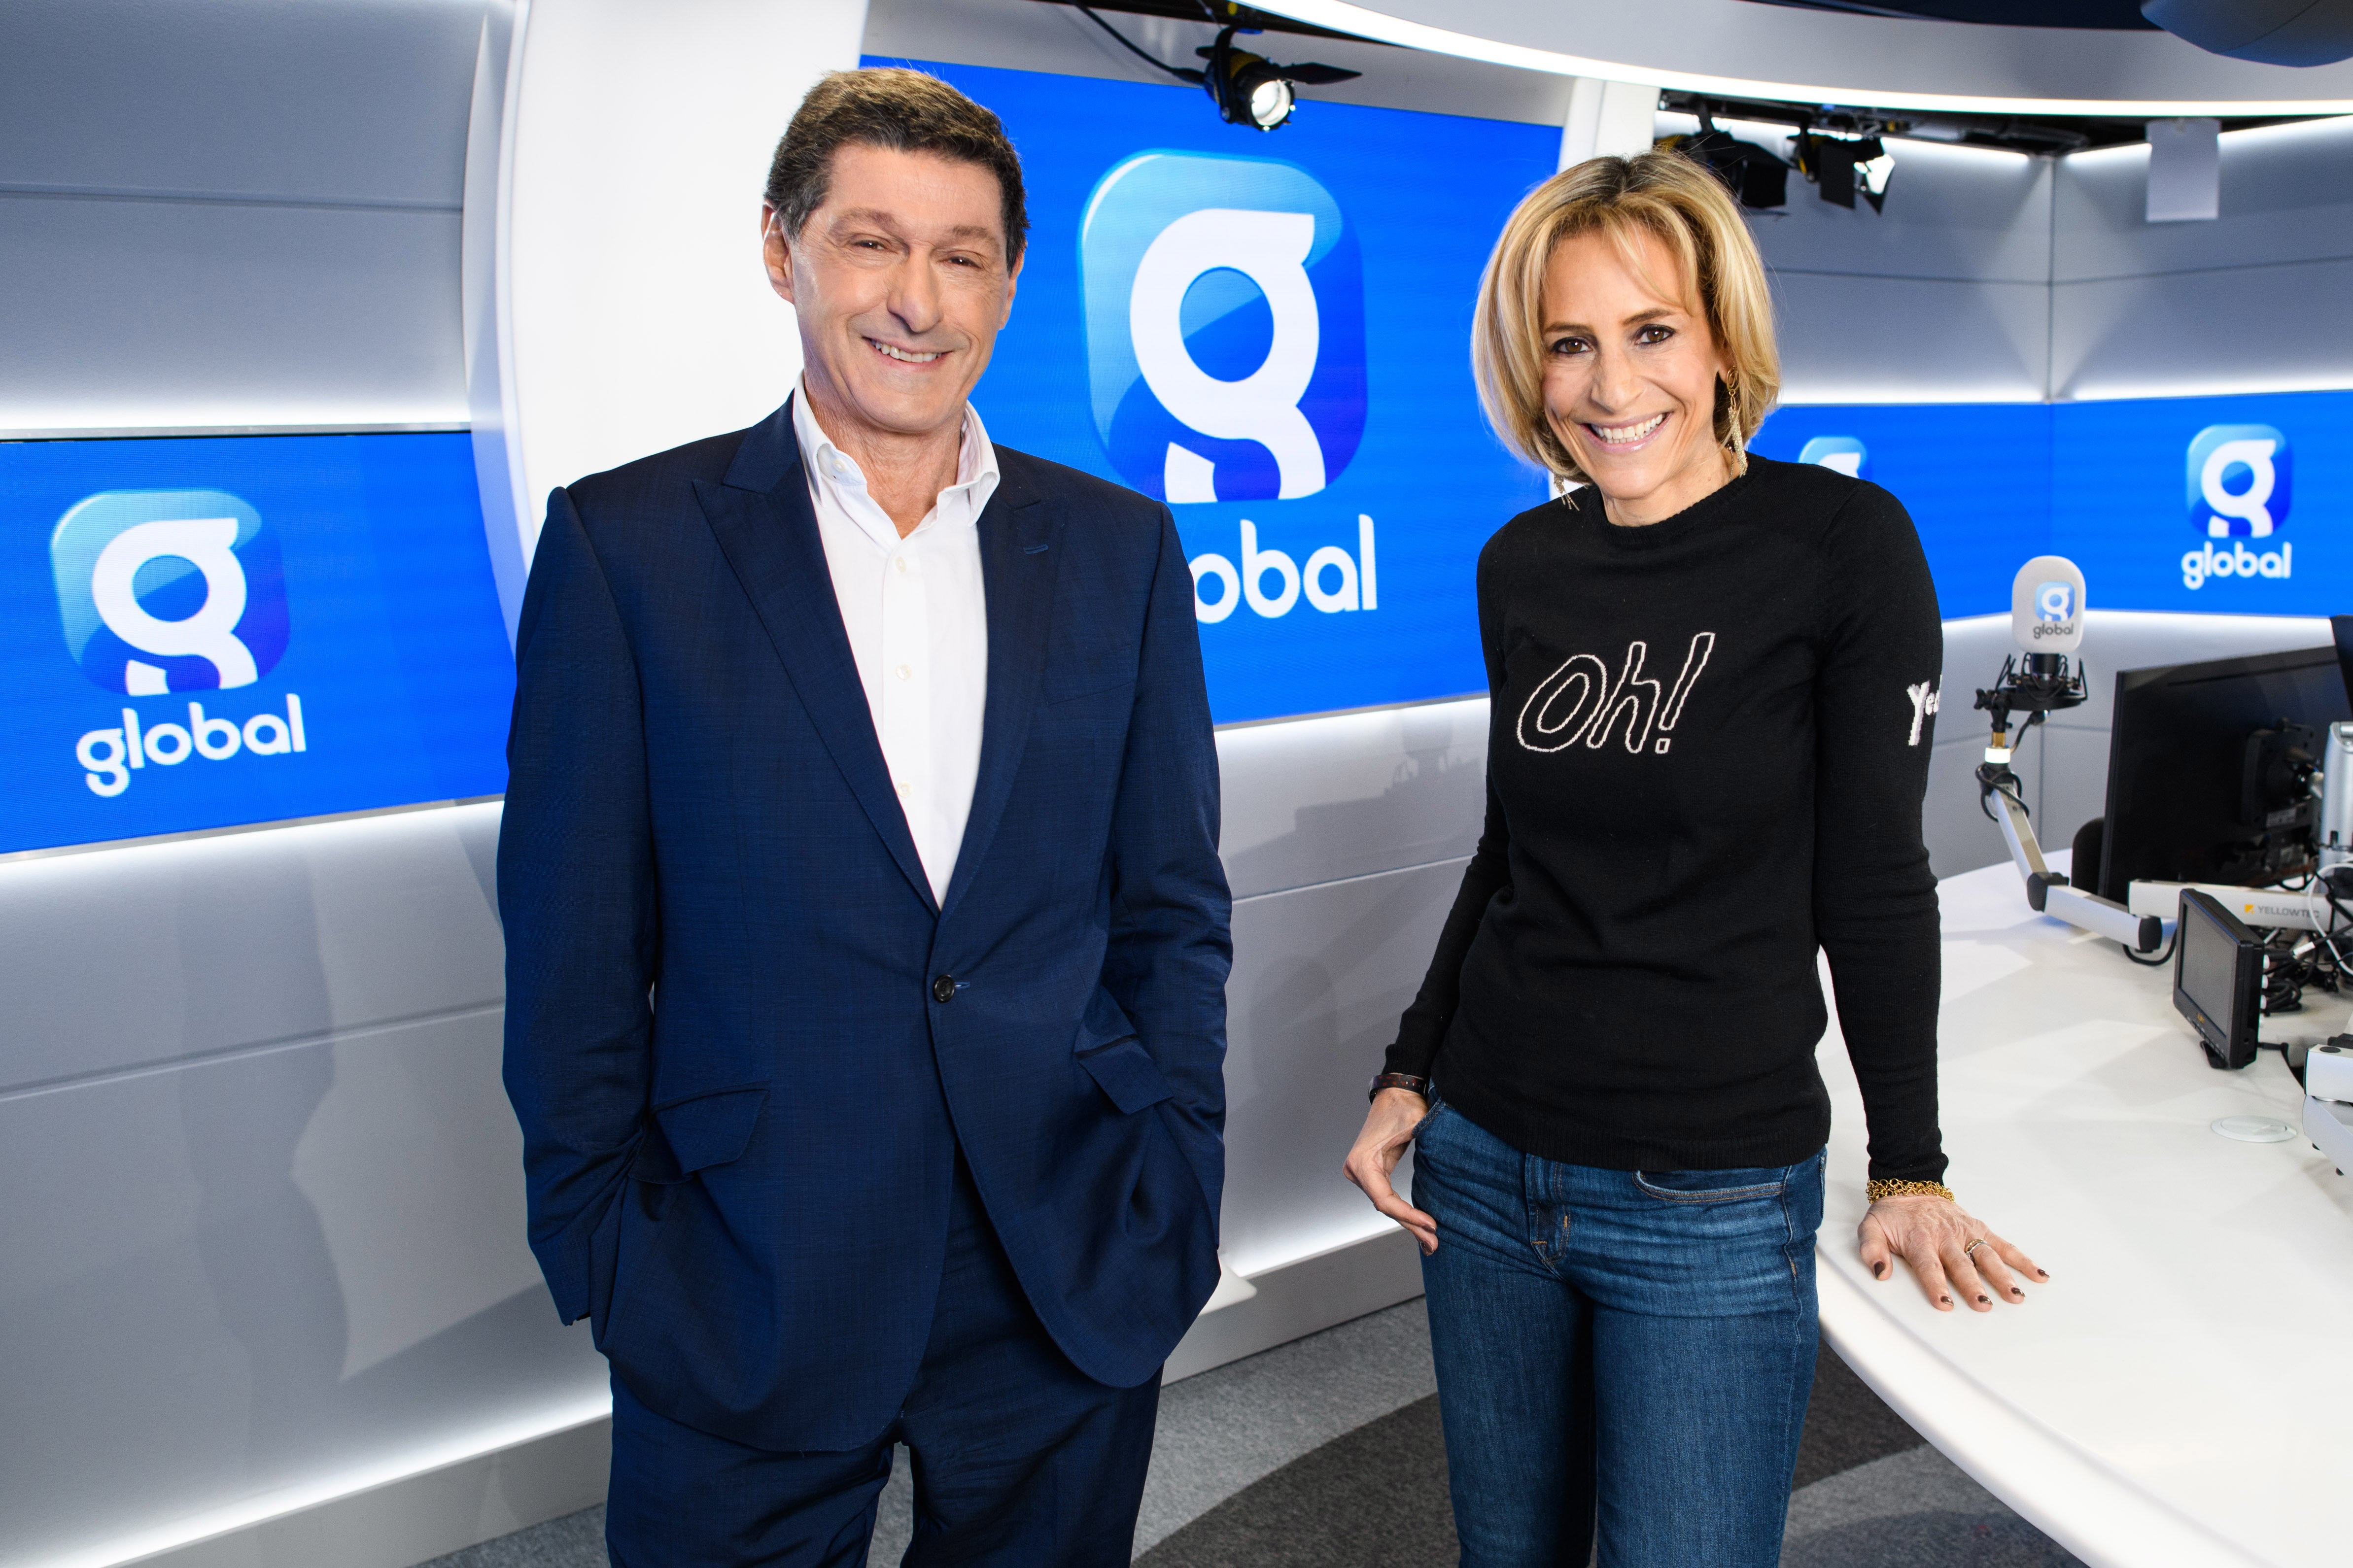 Jon Sopel and Emily Maitlis criticised the BBC’s coverage of Huw Edwards (Global/PA)